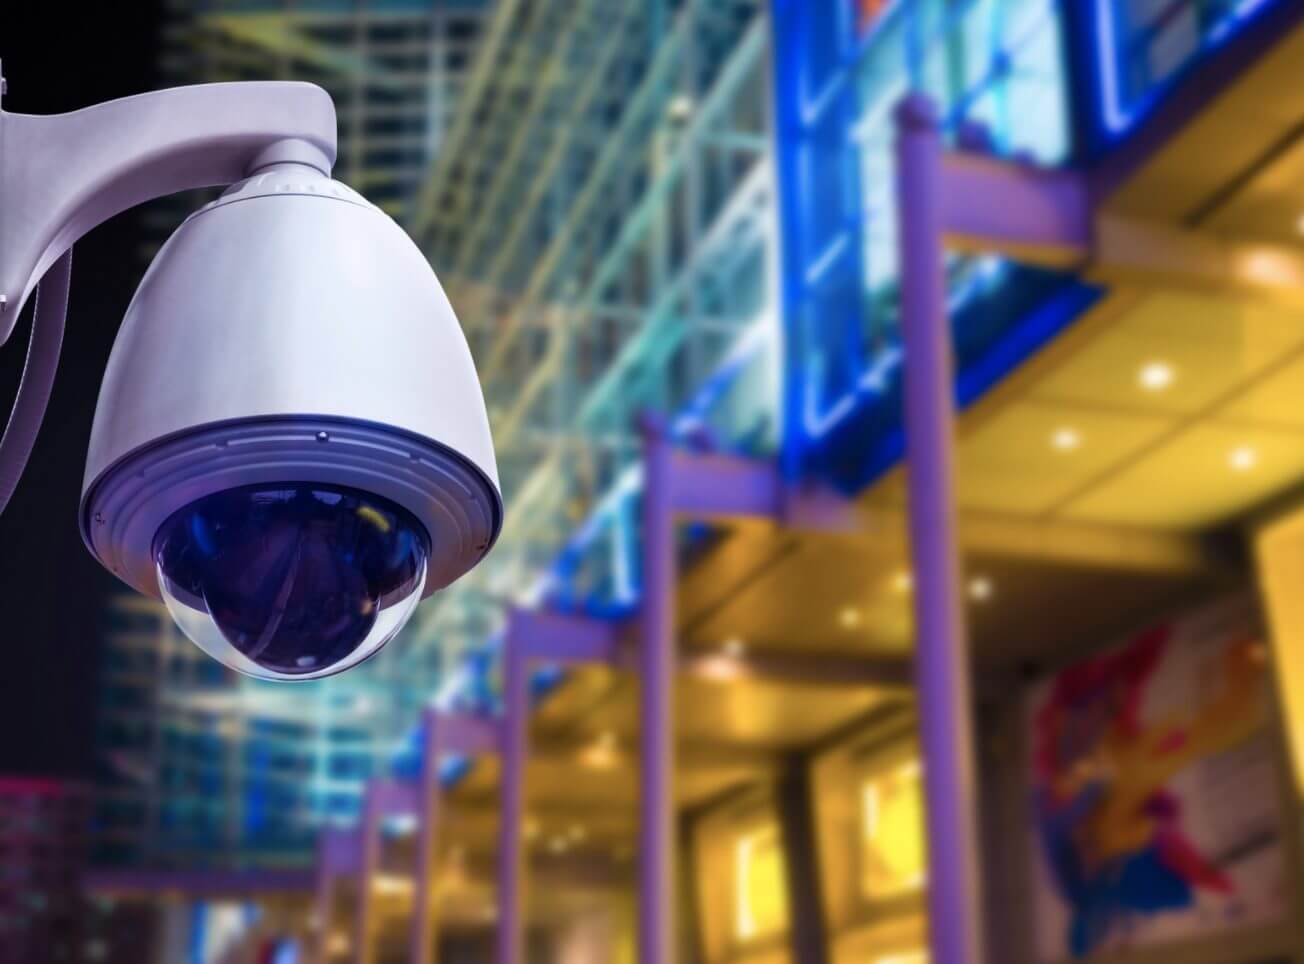 A CCTV security camera overlooks a sidewalk at night.